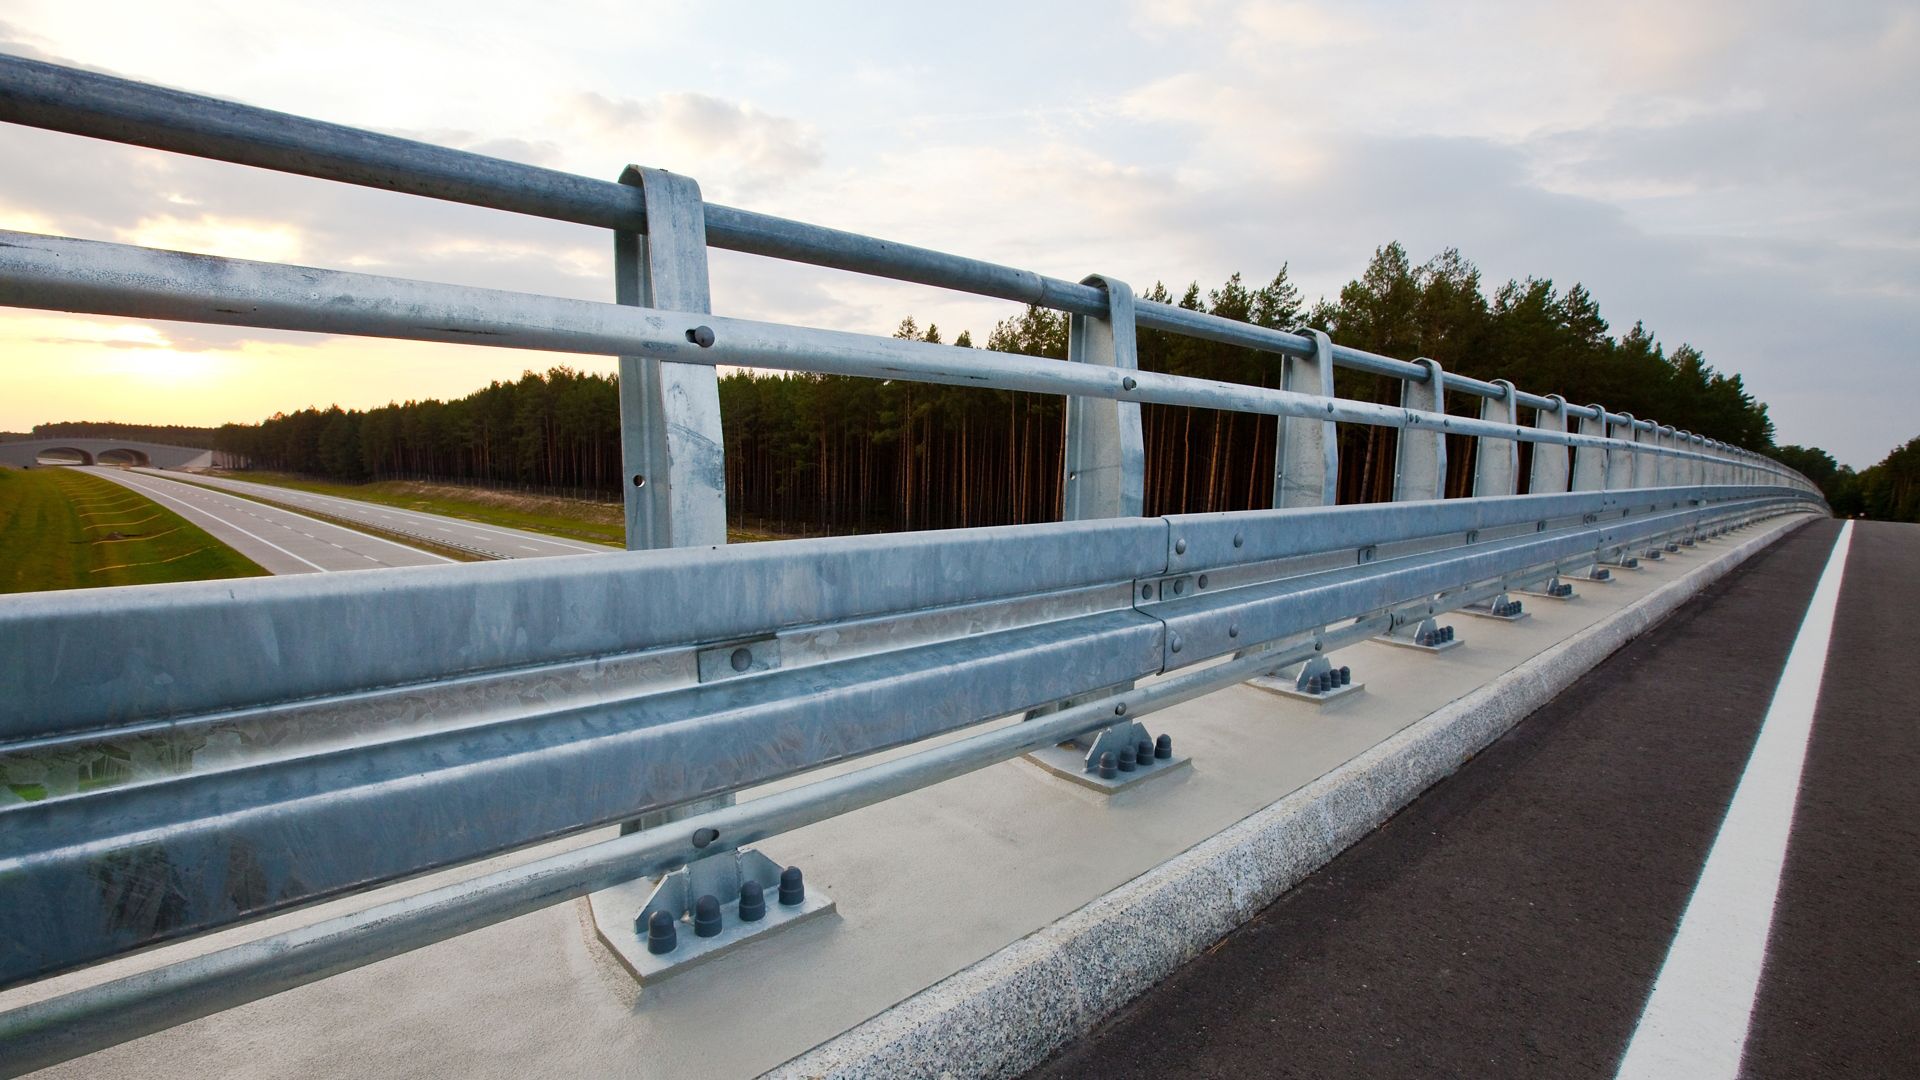 Bridge balustrade fixed and fastened  with SikaGrout cementitious mortar